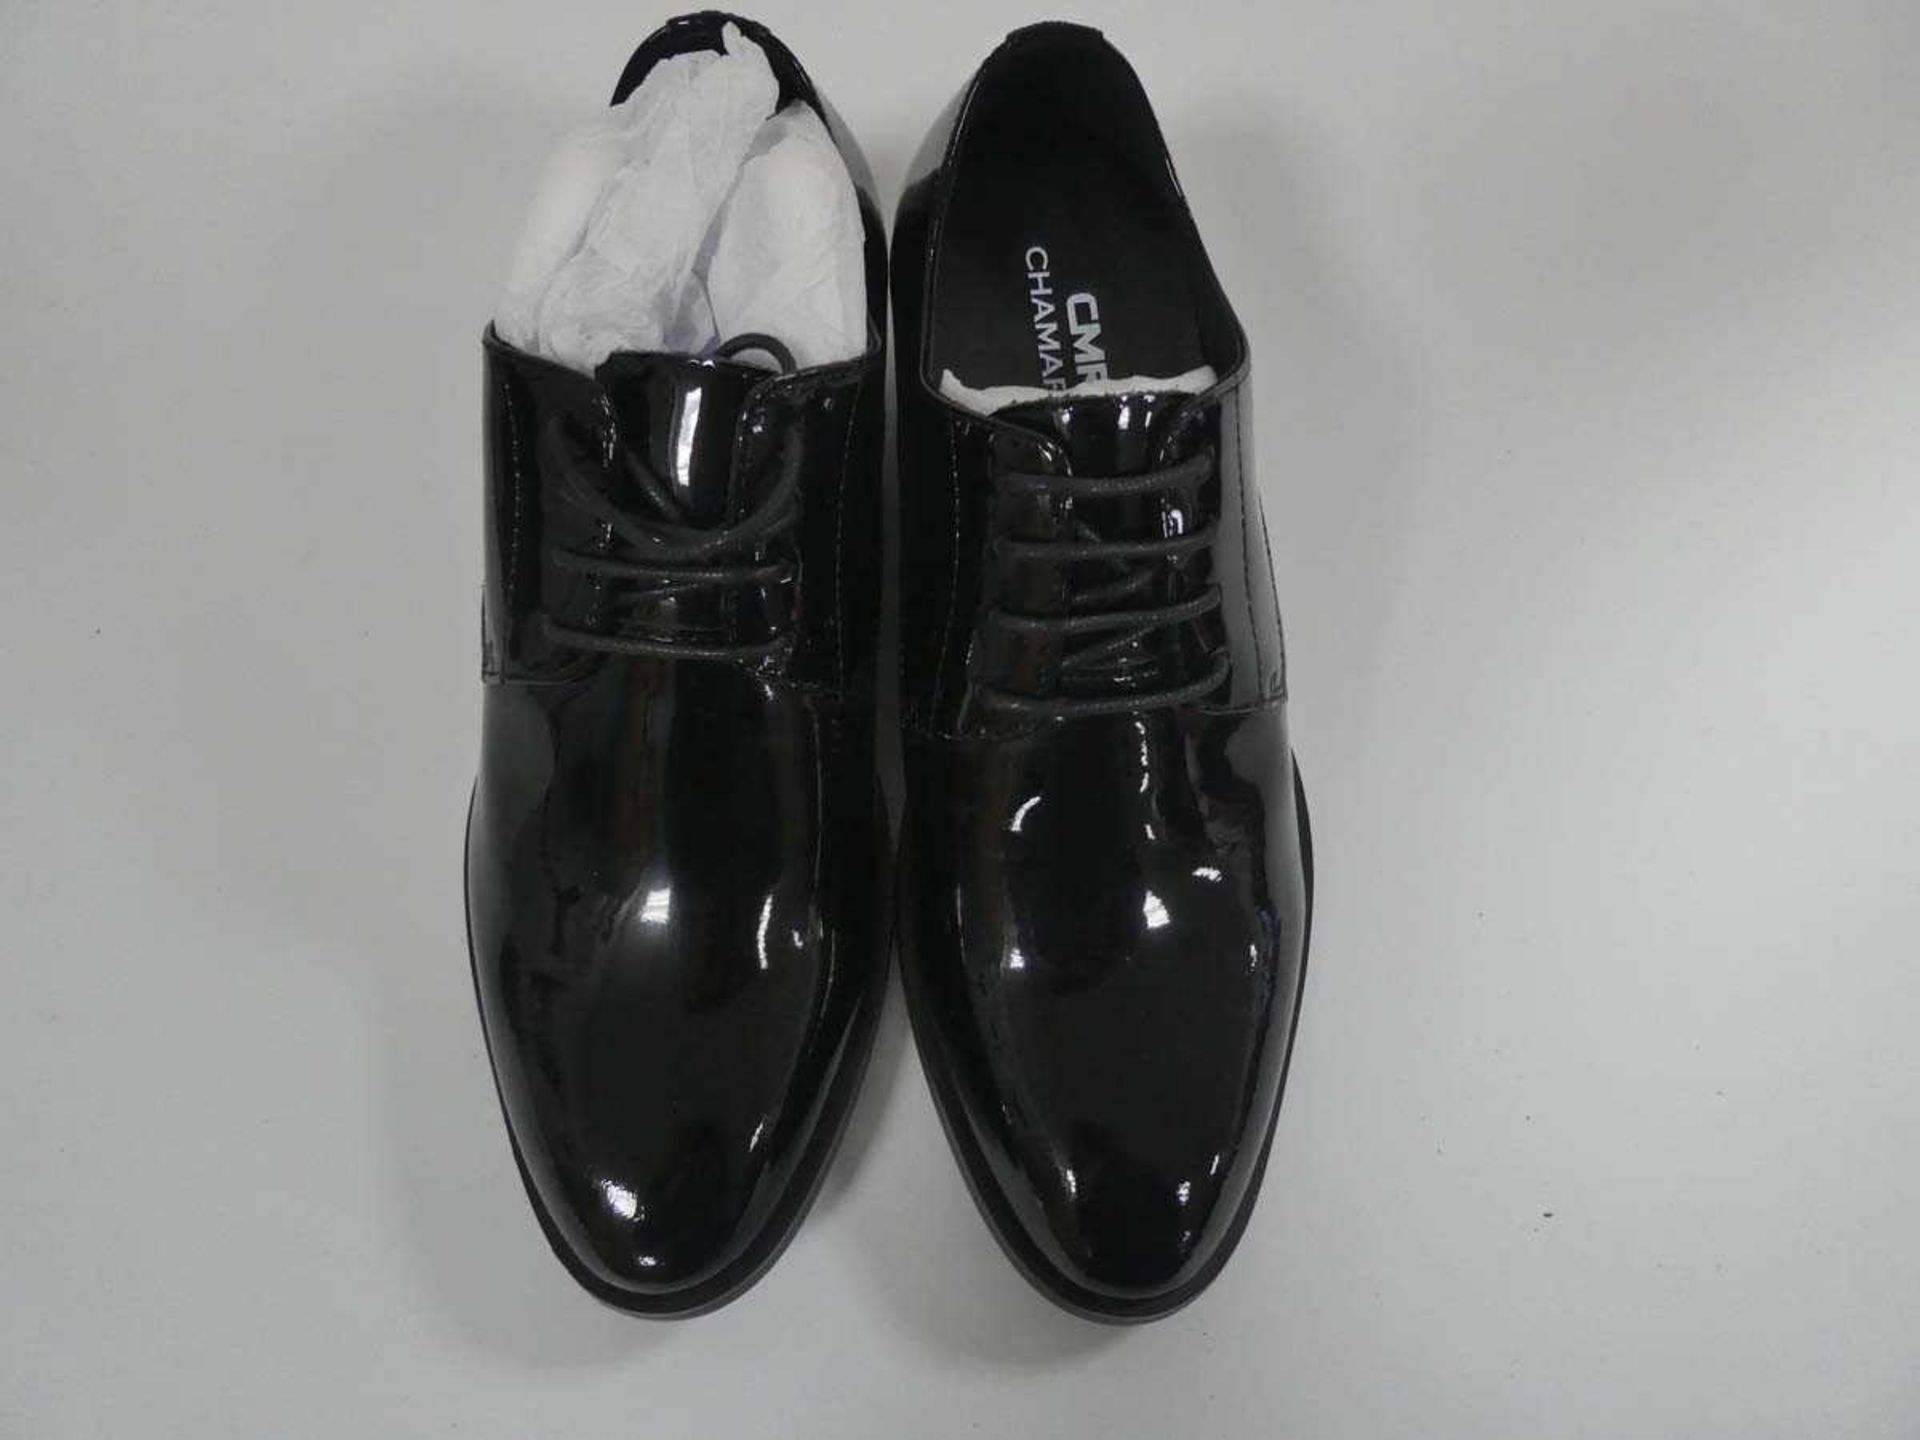 +VAT Boxed pair of Chamaripa patent dress shoes in black size 235 with dust bags (box missing lid) - Image 2 of 4